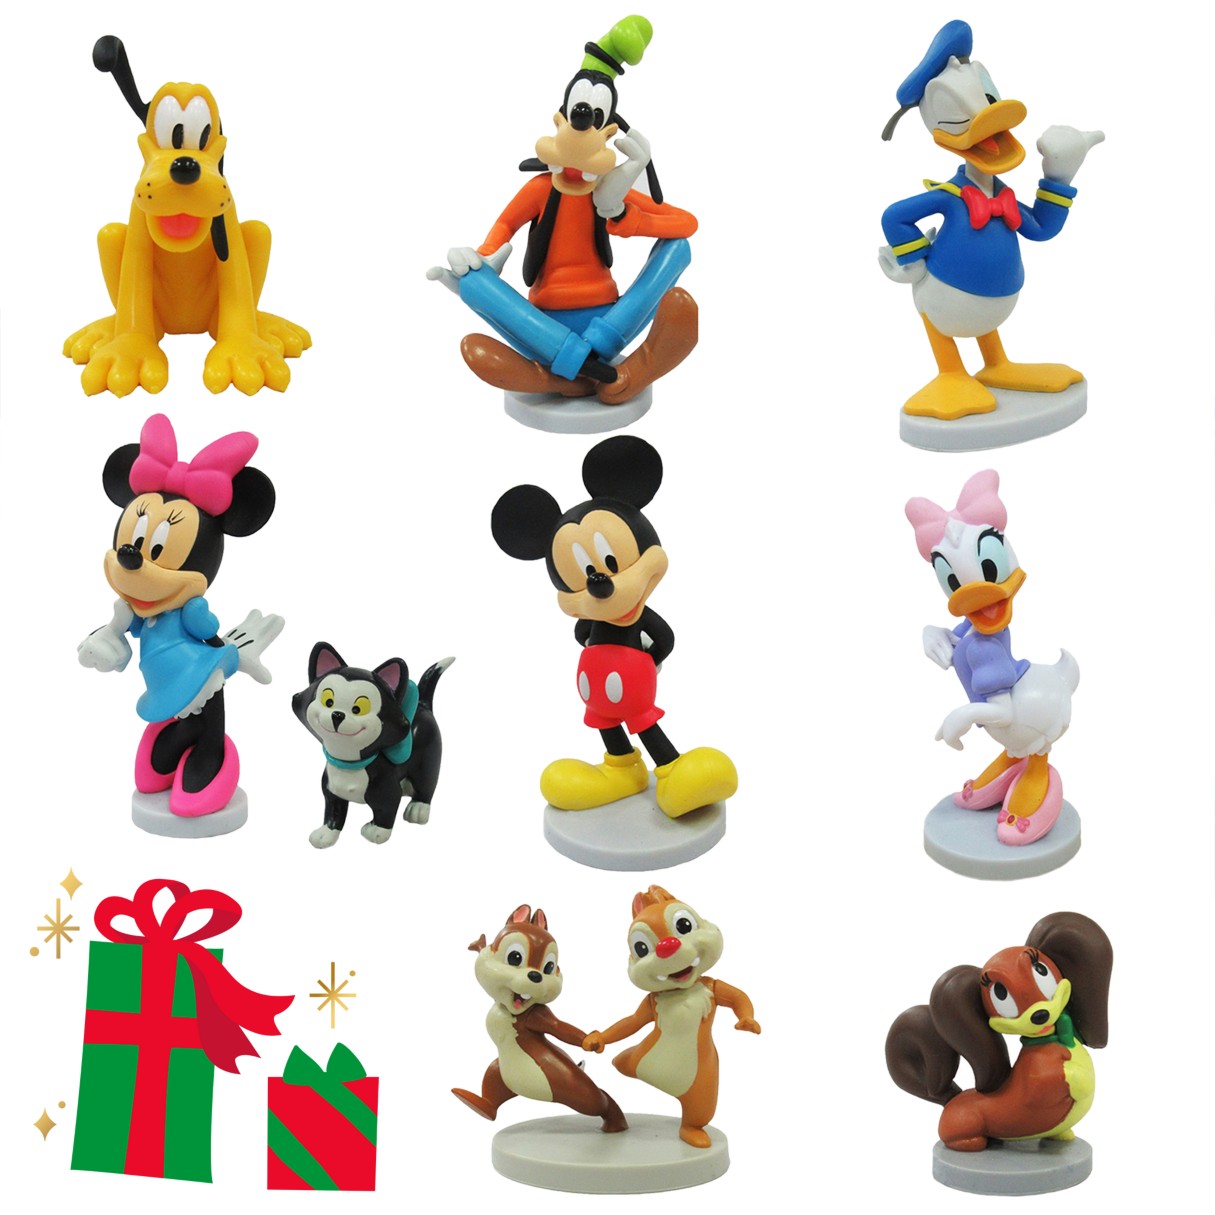 Mickey Mouse and Friends Deluxe Figure Play Set – Toys for Tots Donation Item